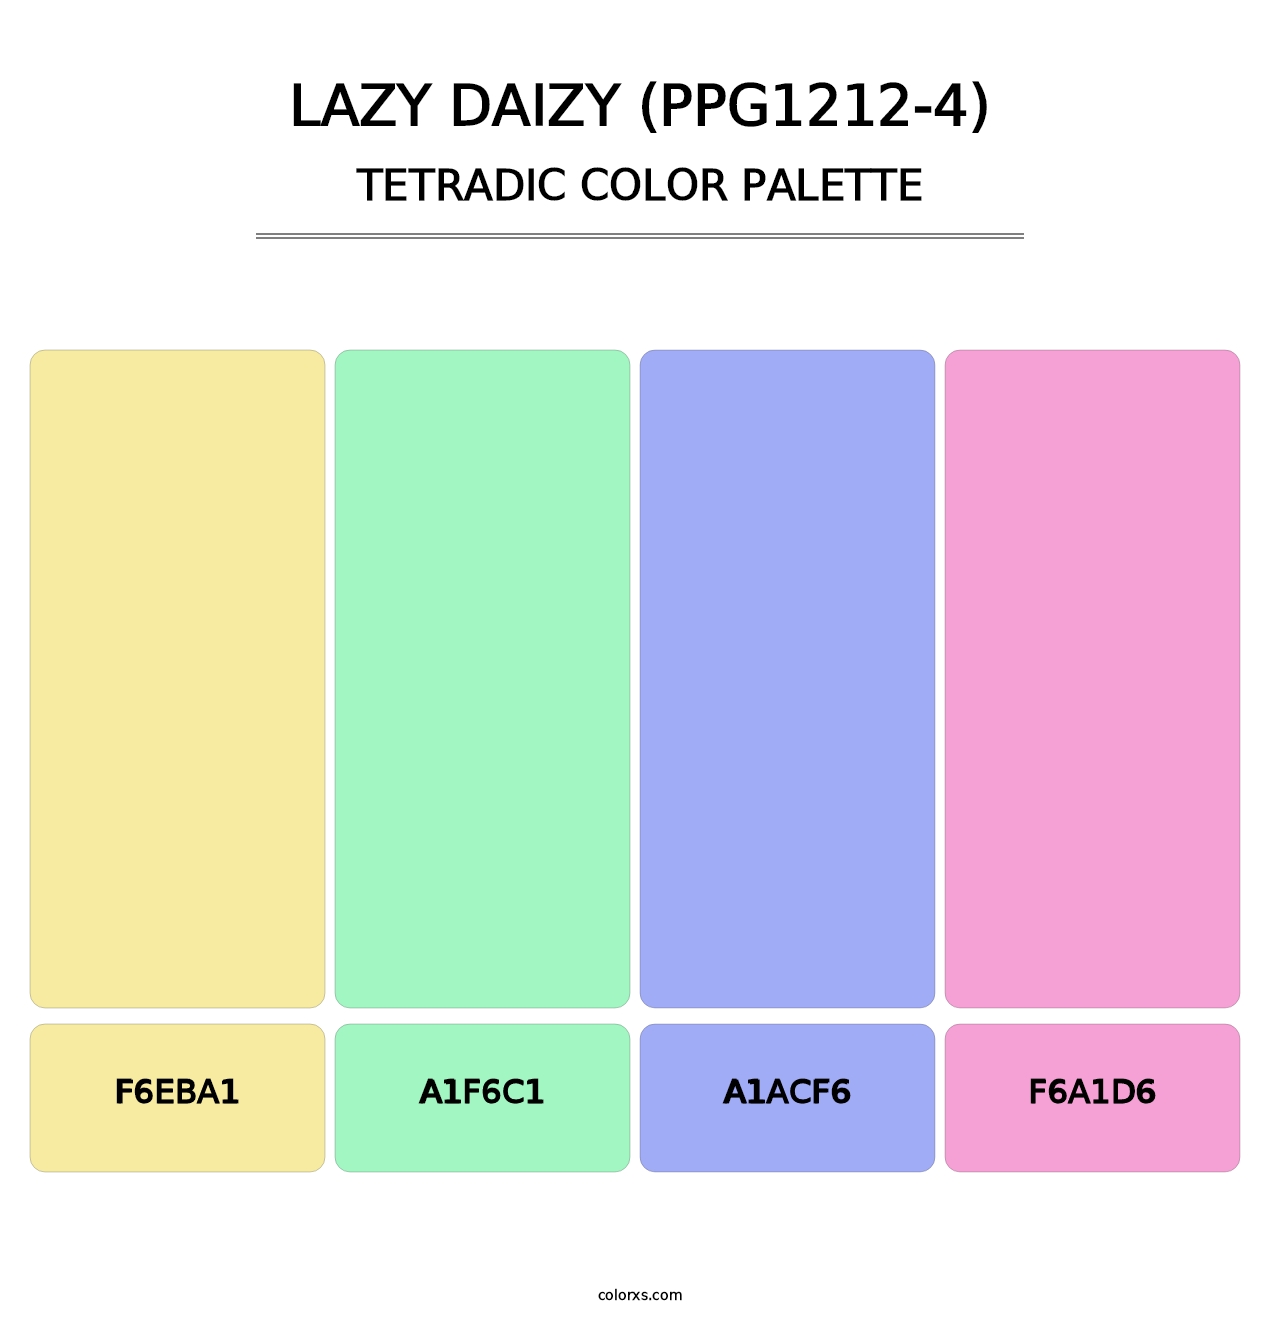 Lazy Daizy (PPG1212-4) - Tetradic Color Palette